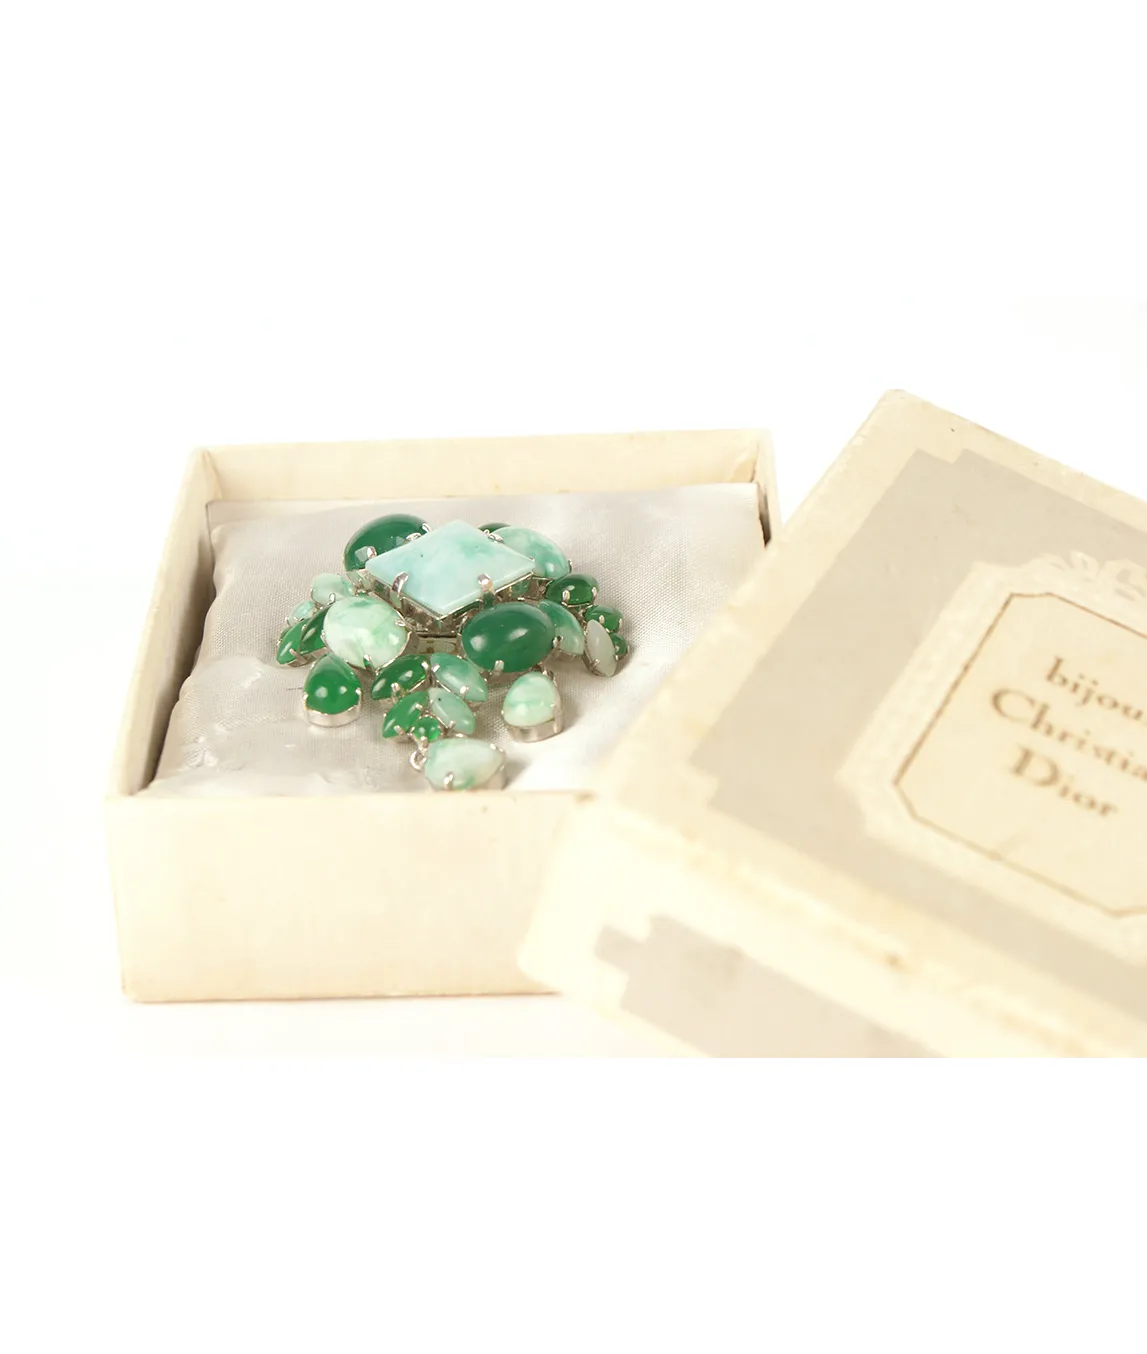 Dior brooch 1962 with box